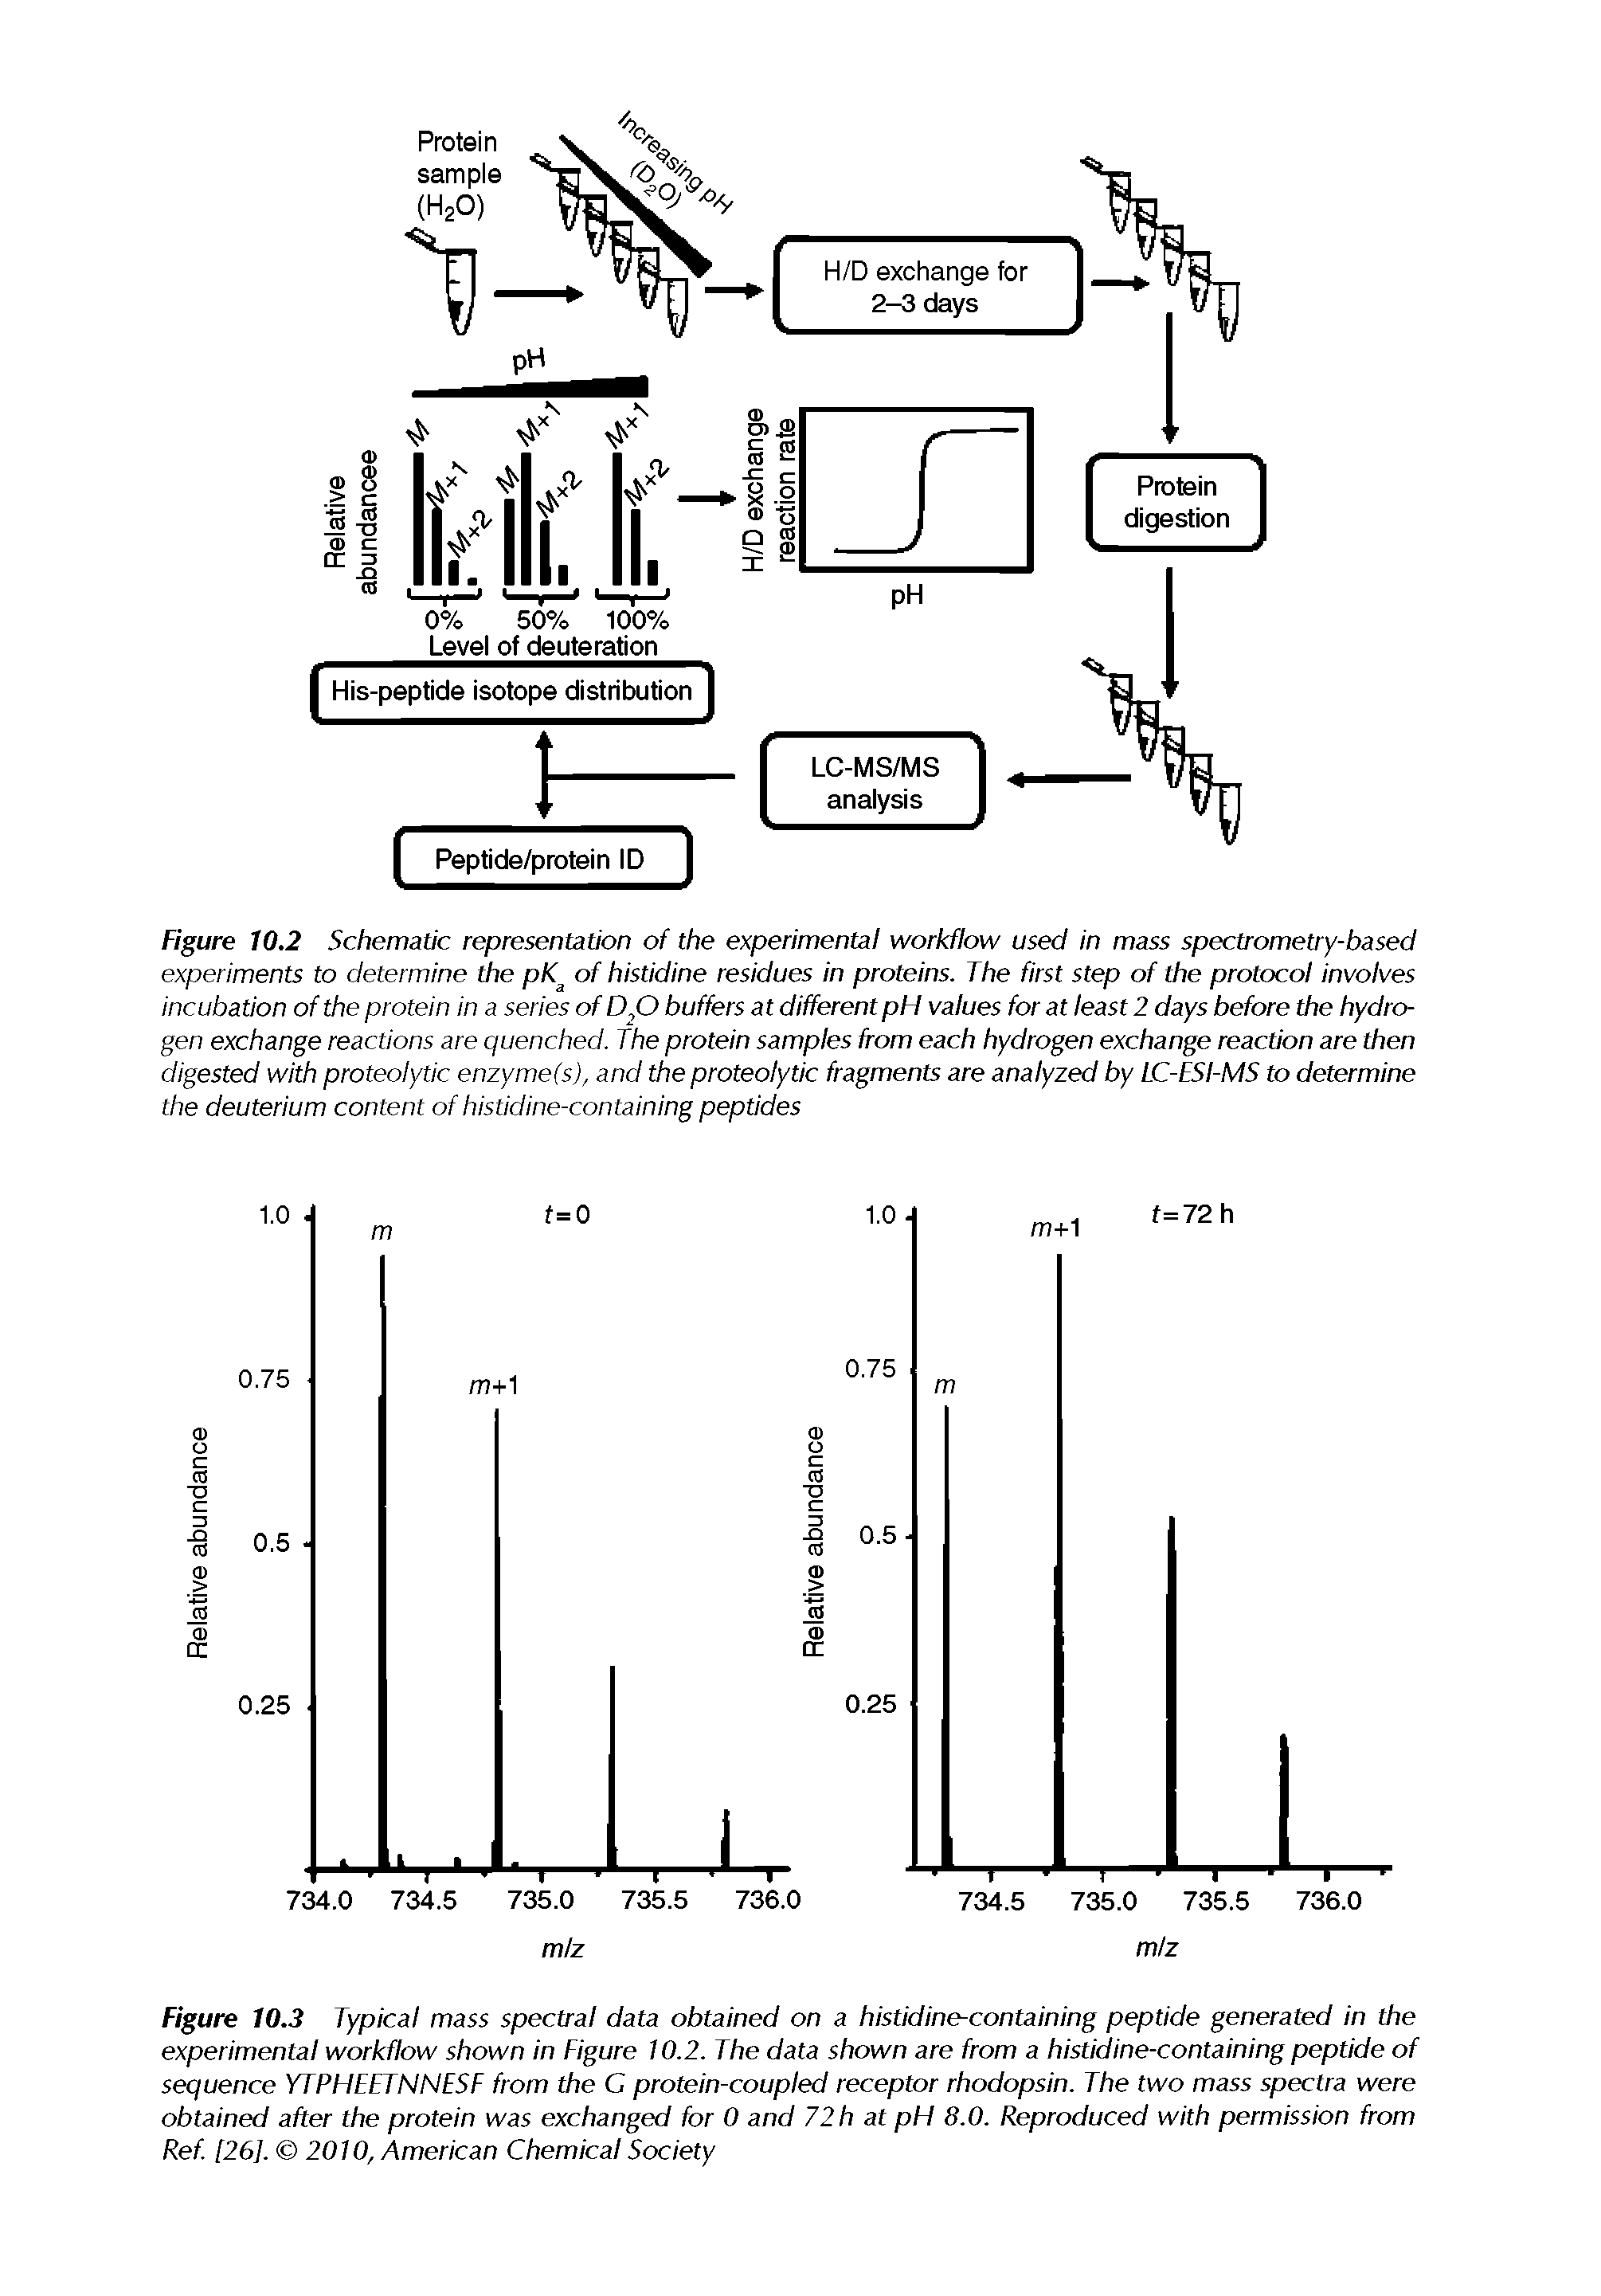 Figure 10.3 Typical mass spectral data obtained on a histidine-containing peptide generated in the experimental workflow shown in Figure 10.2. The data shown are from a histidine-containing peptide of sequence YTPHEETNNESF from the G protein-coupled receptor rhodopsin. The two mass spectra were obtained after the protein was exchanged for 0 and 72 h at pH 8.0. Reproduced with permission from Ref [26]. 2010, American Chemical Society...